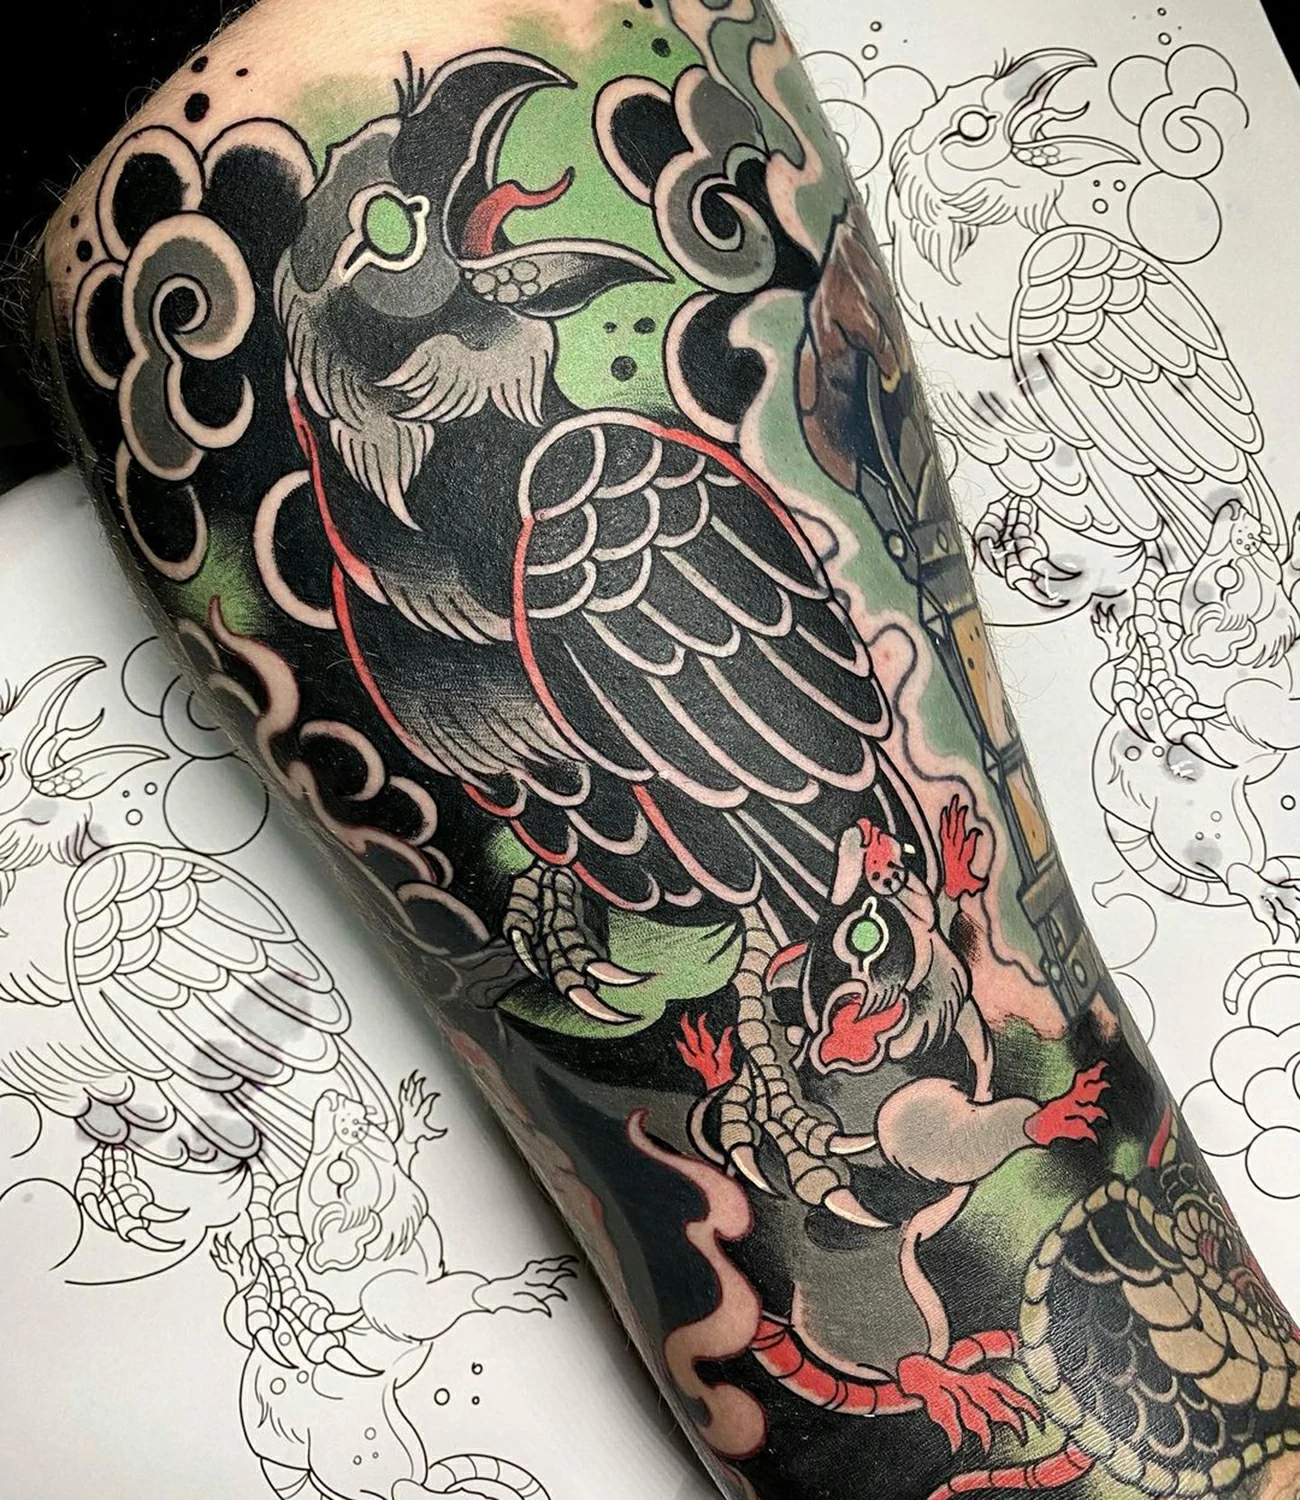 Japanese raven tattoo: A raven tattoo incorporating elements of Japanese art and symbolism.